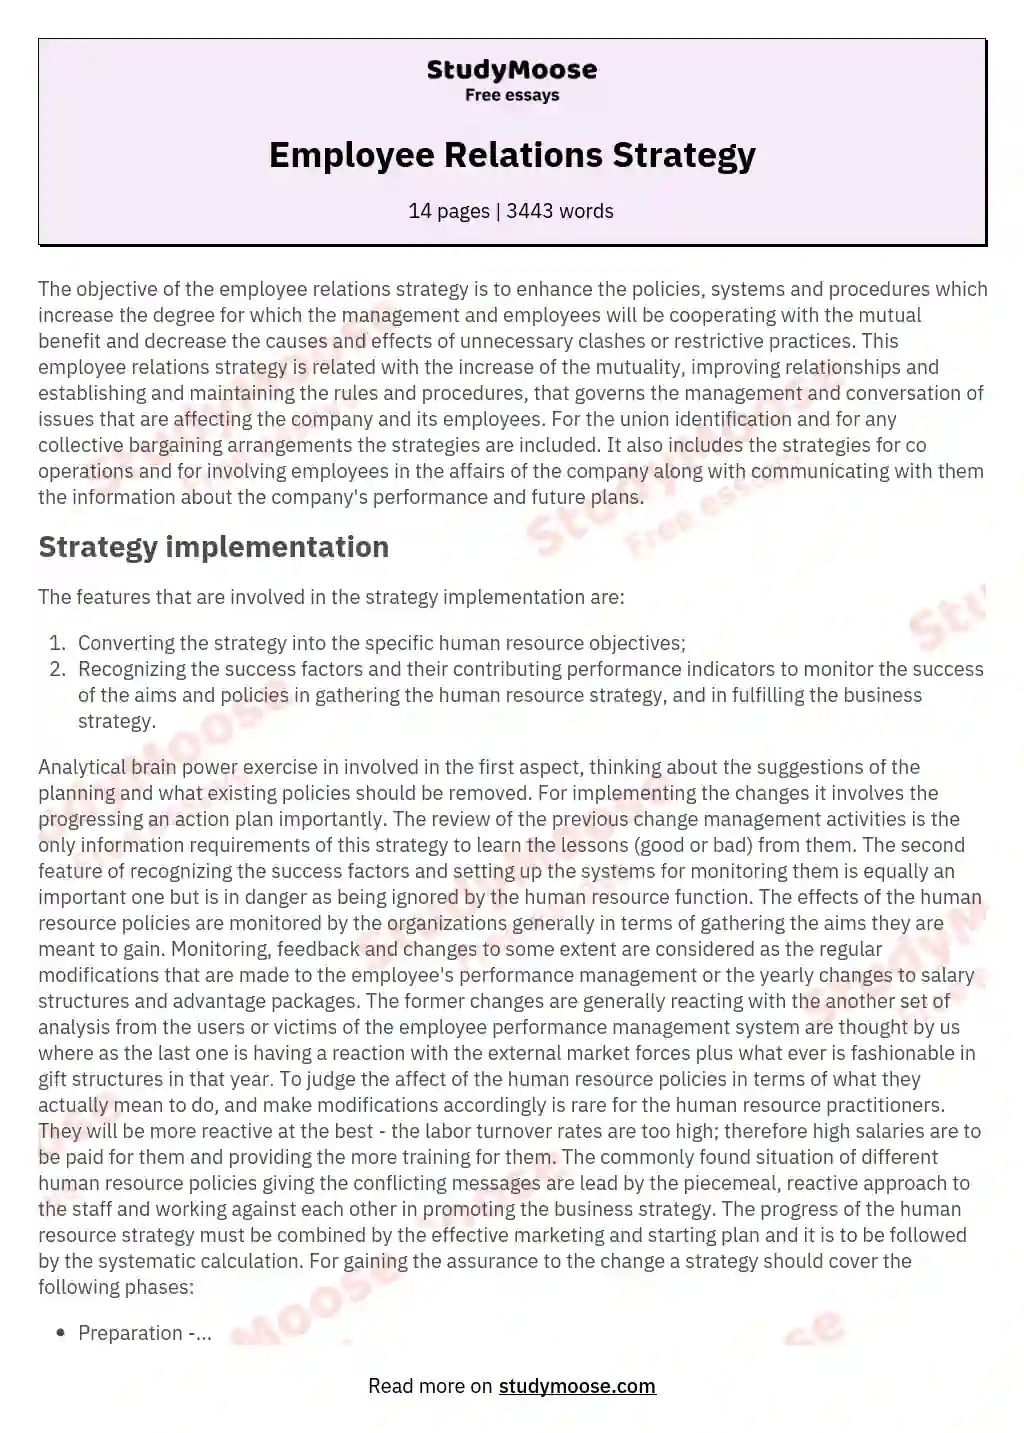 Employee Relations Strategy essay